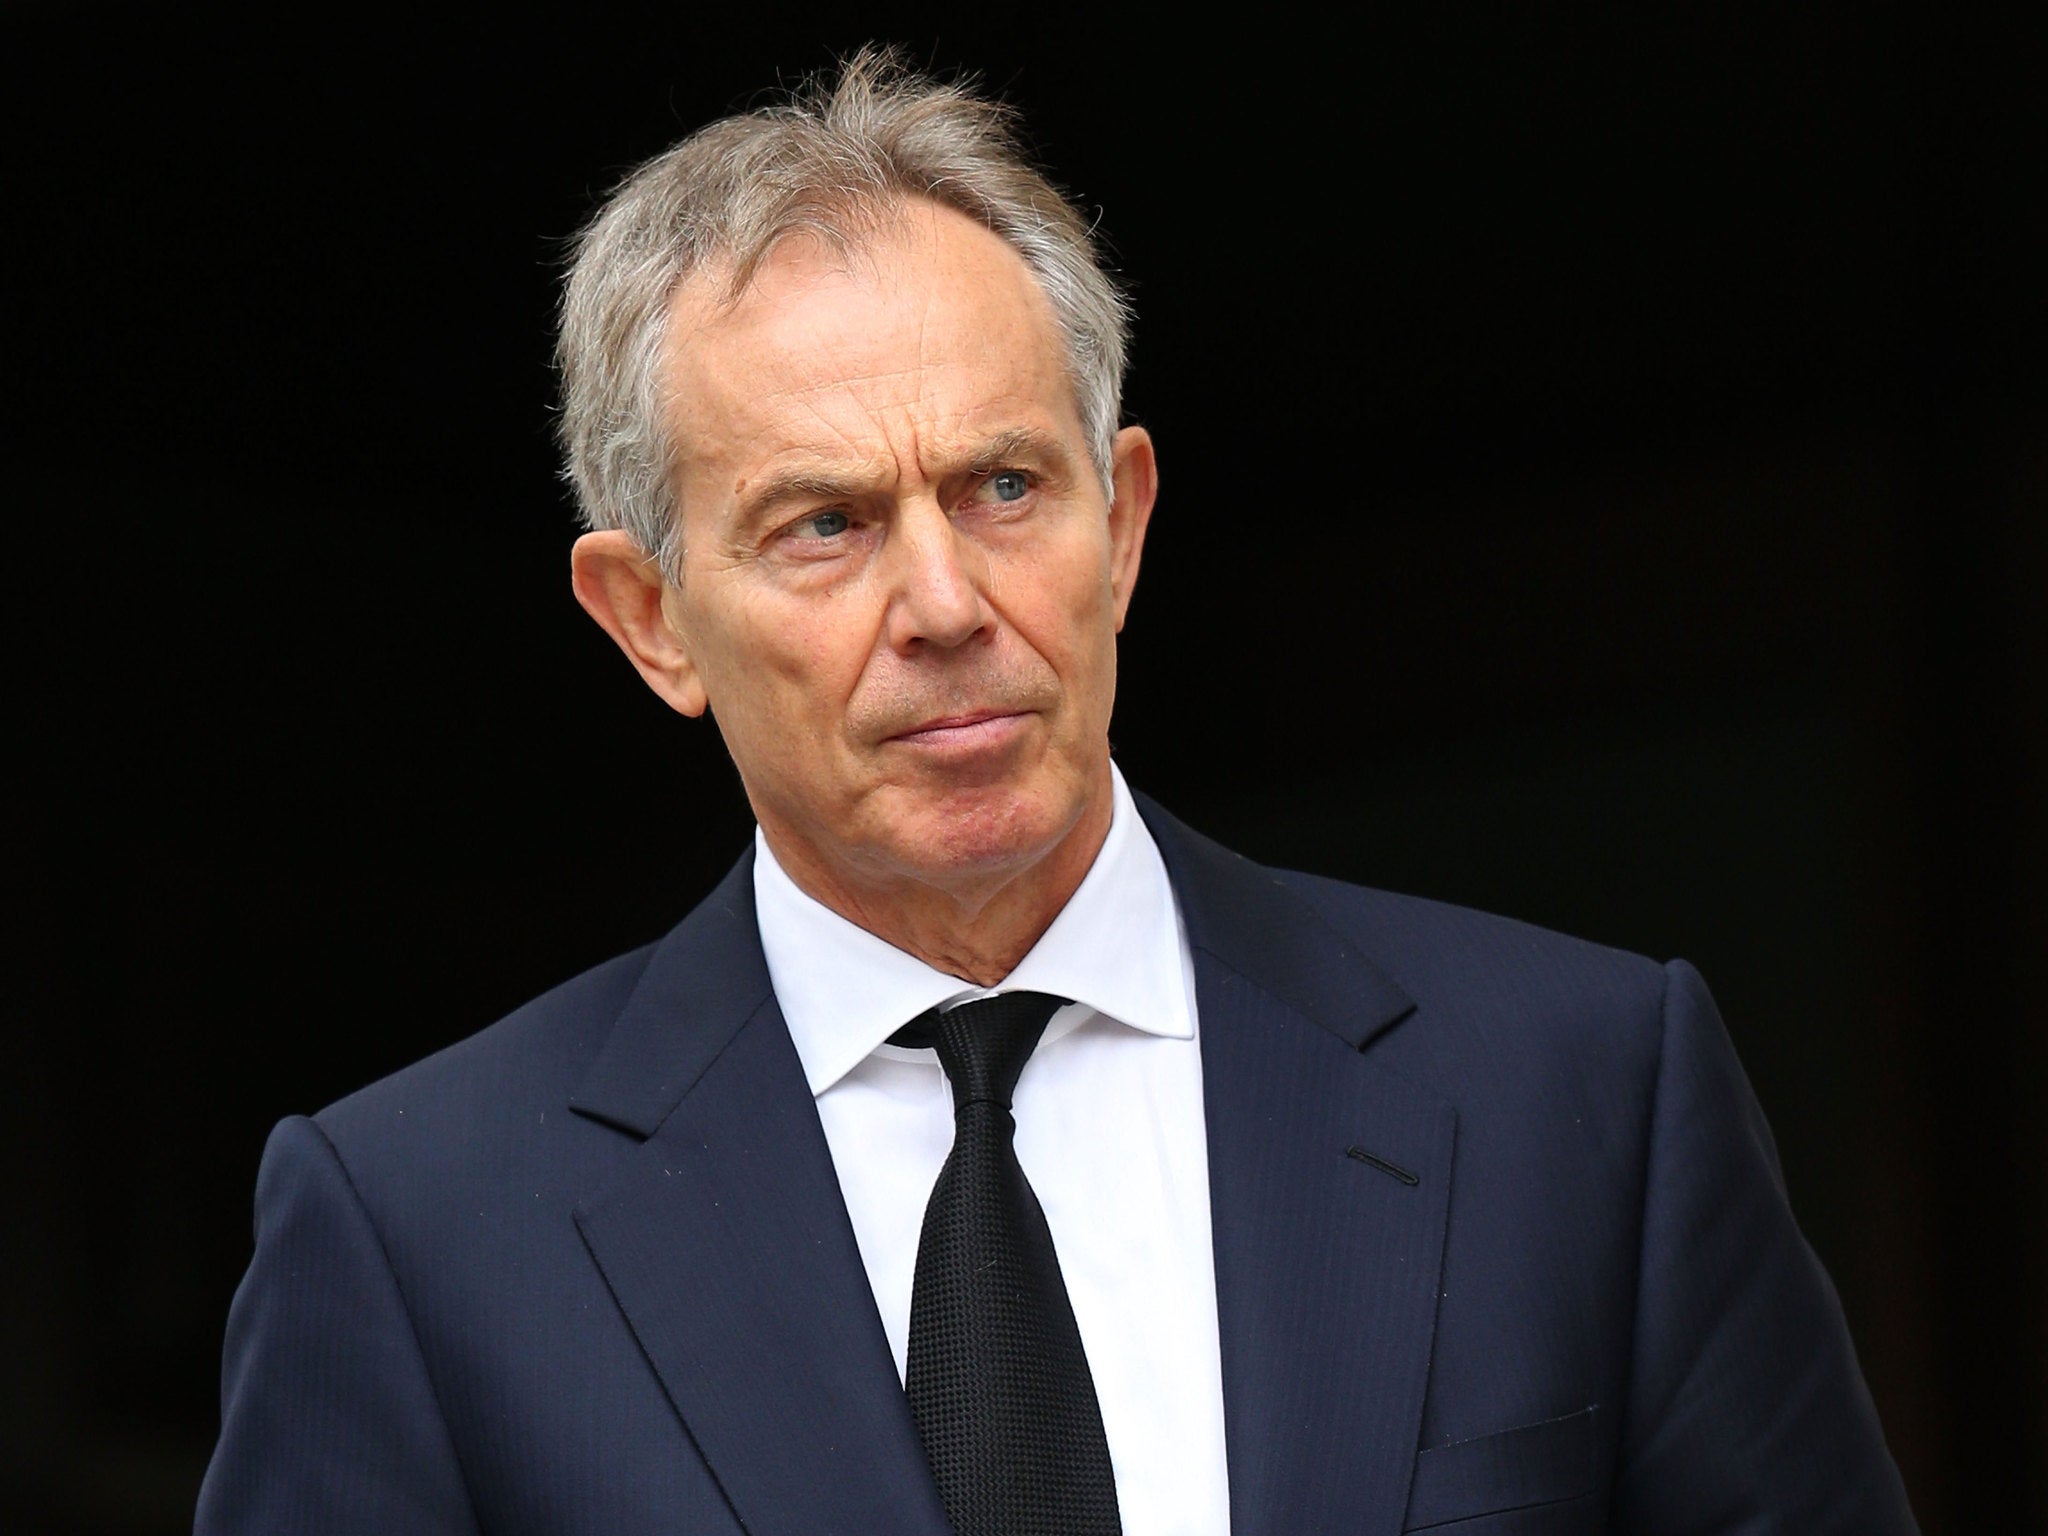 Blair, who is now a Middle East peace envoy, has so far not given evidence to the committee in person